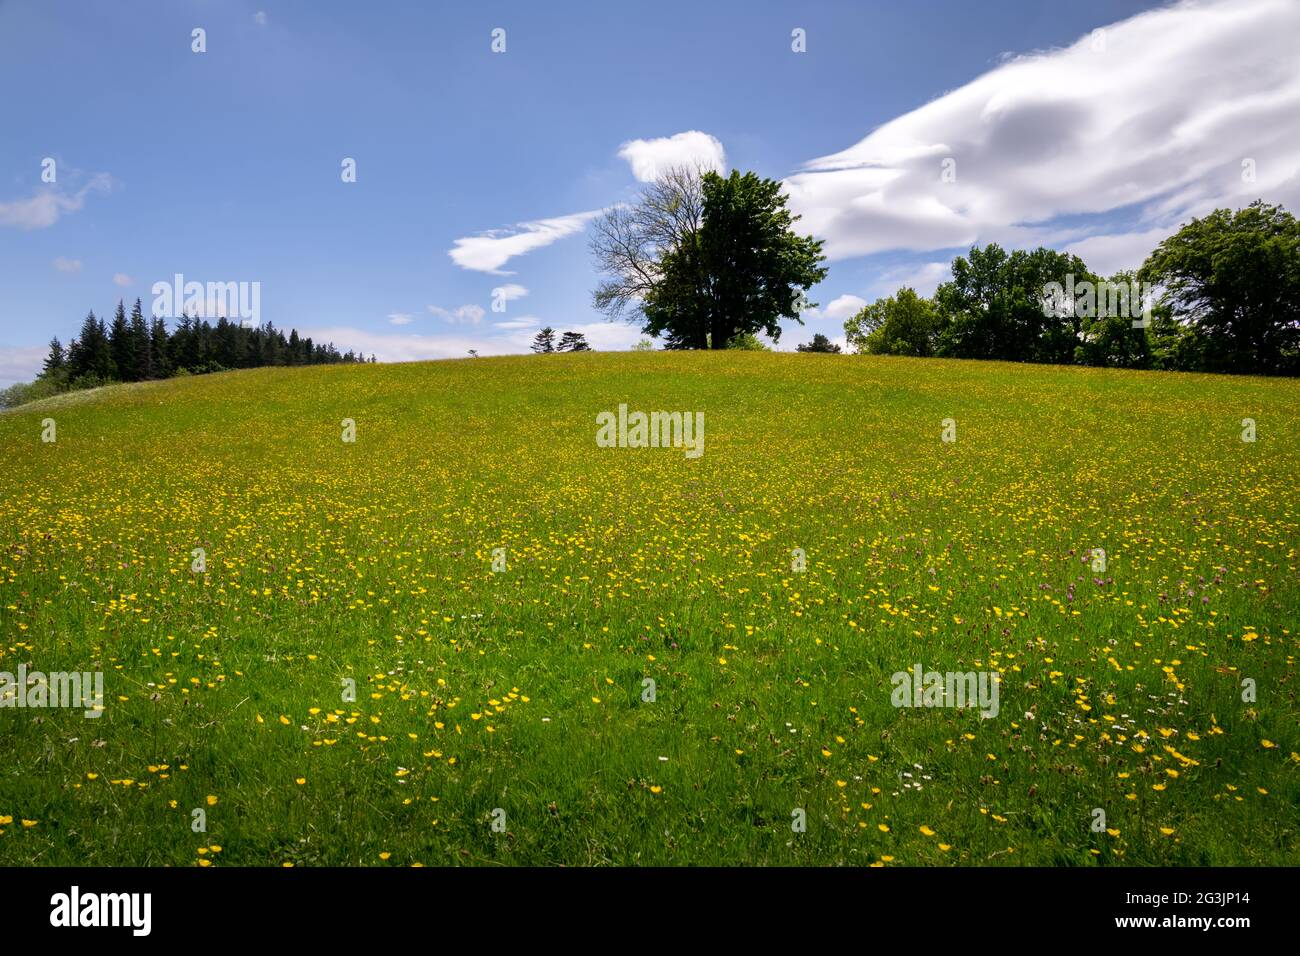 Beautiful meadow with yellow flowers in Upper Teesdale, County Durham, England Stock Photo